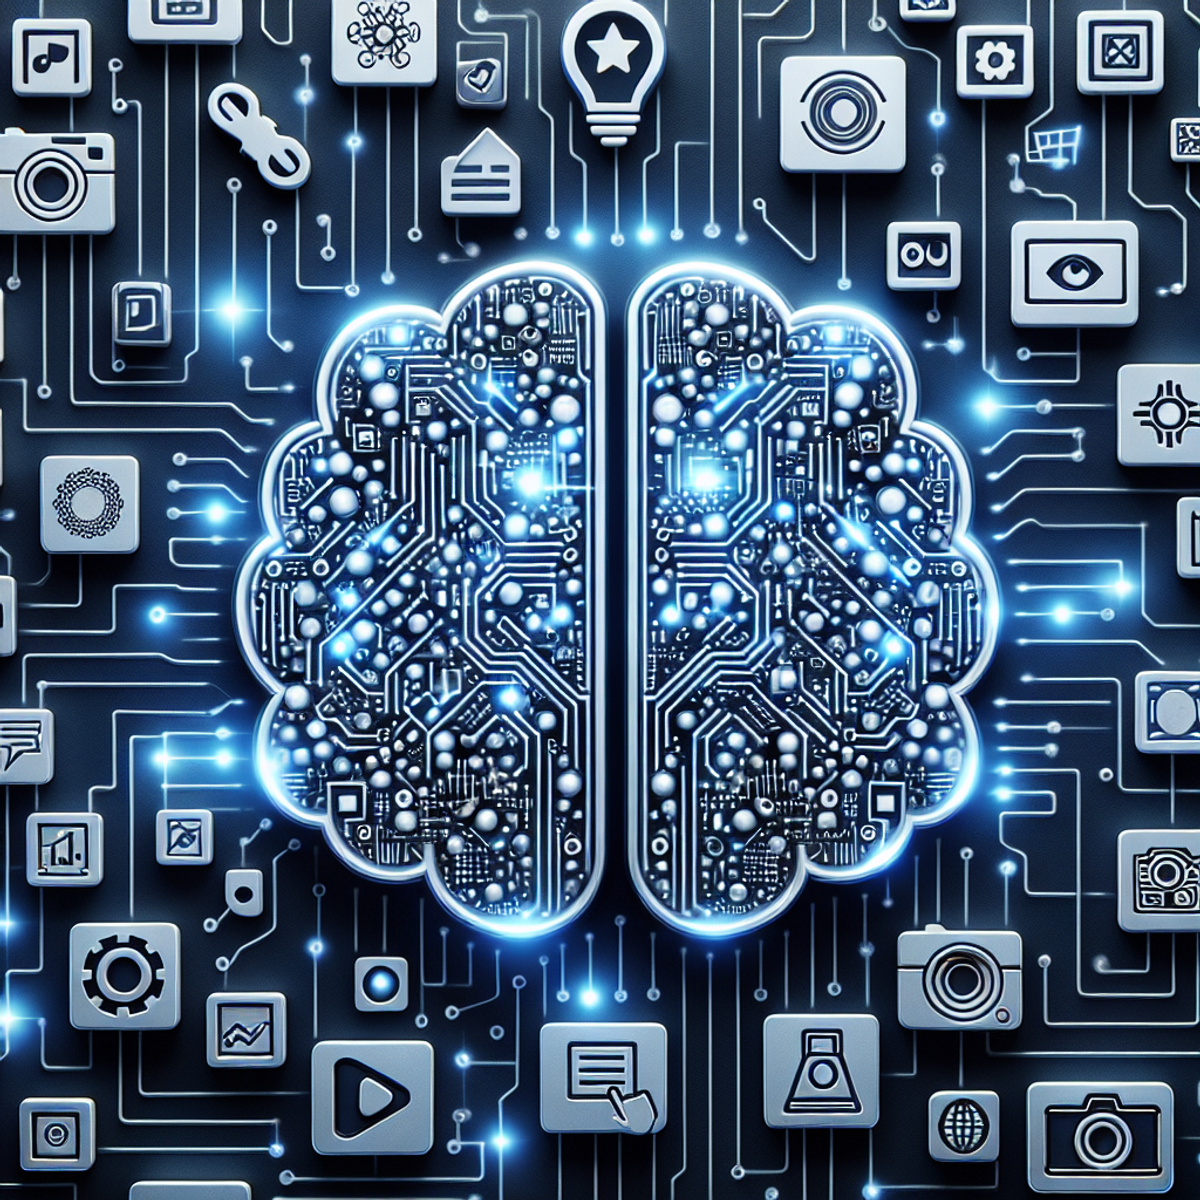 A large brain with circuit-like patterns integrated within it, symbolizing AI, is shown analyzing a mix of images and videos represented by play buttons and camera icons, indicating image and video SEO techniques.